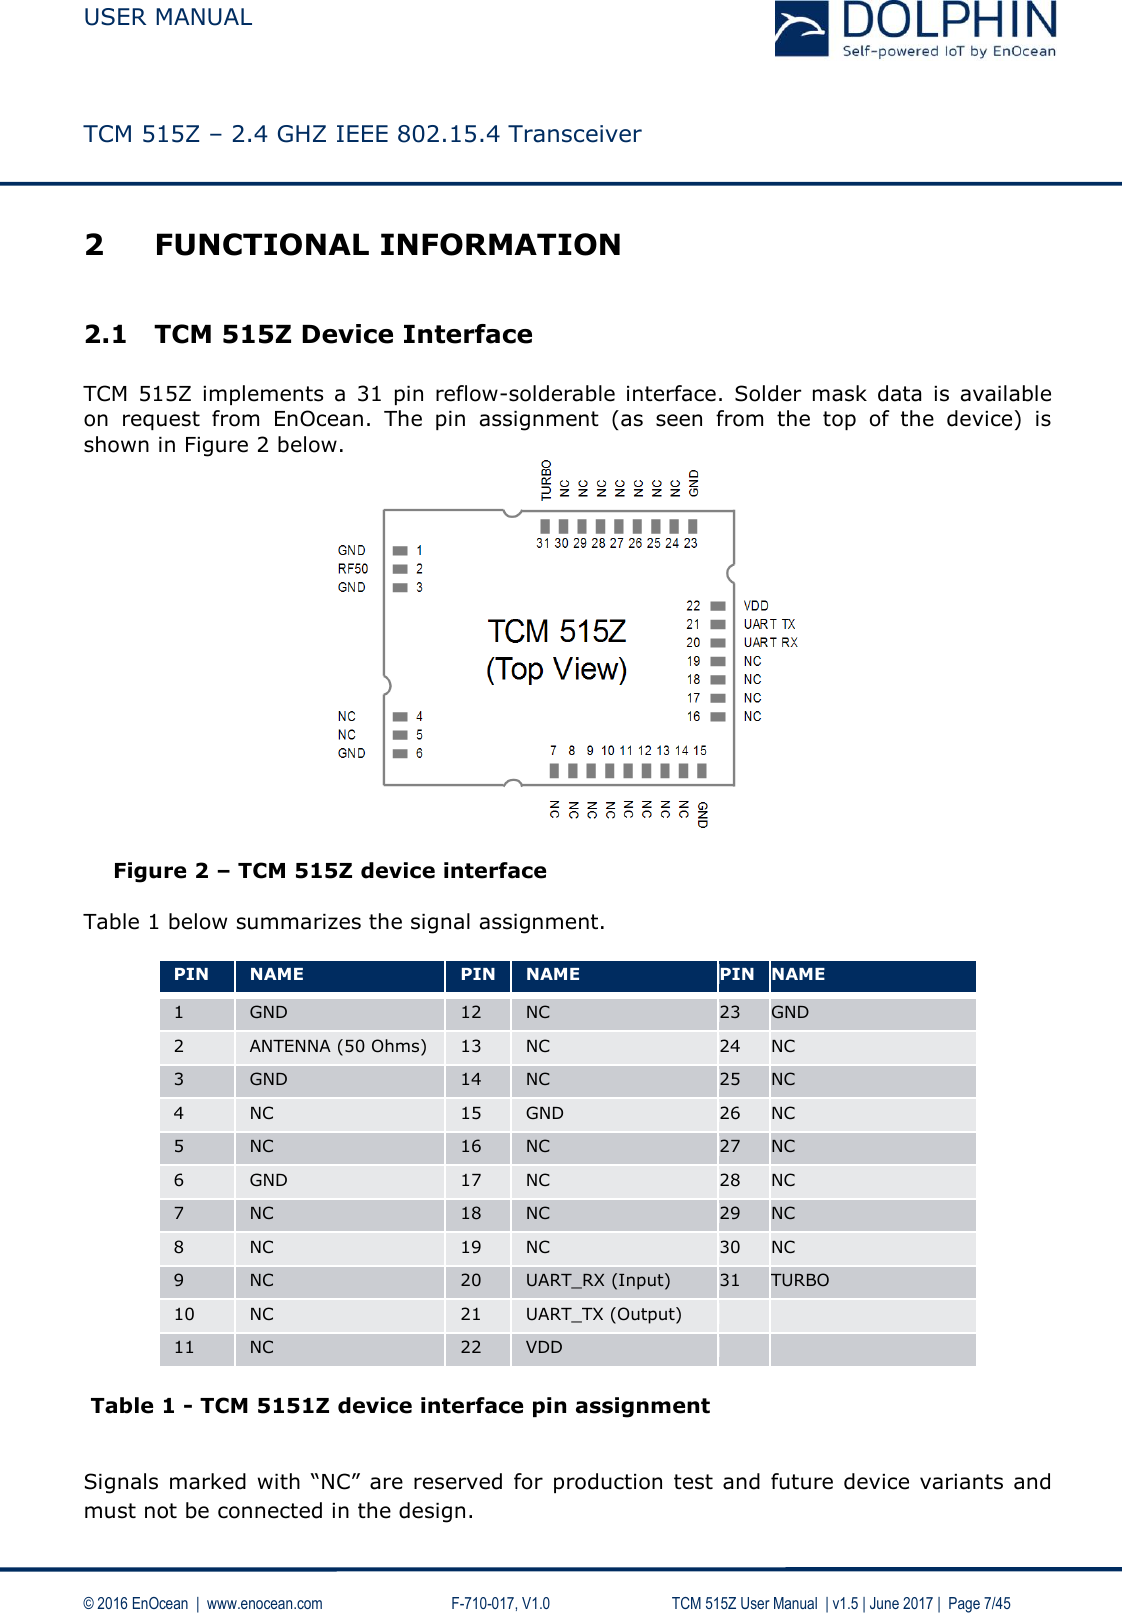  USER MANUAL    TCM 515Z – 2.4 GHZ IEEE 802.15.4 Transceiver   © 2016 EnOcean  |  www.enocean.com     F-710-017, V1.0        TCM 515Z User Manual  | v1.5 | June 2017 |  Page 7/45 2 FUNCTIONAL INFORMATION  2.1 TCM 515Z Device Interface  TCM  515Z implements a  31  pin  reflow-solderable  interface.  Solder  mask  data is available on  request  from  EnOcean.  The  pin  assignment  (as  seen  from  the  top  of  the  device)  is shown in Figure 2 below.   Figure 2 – TCM 515Z device interface  Table 1 below summarizes the signal assignment.  PIN  NAME  PIN  NAME  PIN  NAME  1  GND  12  NC 23  GND 2 ANTENNA (50 Ohms) 13  NC 24  NC  3 GND 14 NC  25 NC  4 NC  15 GND  26  NC  5 NC 16  NC 27 NC  6 GND 17  NC 28  NC  7  NC 18 NC 29 NC  8  NC 19 NC  30 NC 9 NC  20  UART_RX (Input) 31  TURBO 10 NC  21  UART_TX (Output)   11 NC  22 VDD     Table 1 - TCM 5151Z device interface pin assignment  Signals marked with “NC” are reserved  for  production test and future  device variants and must not be connected in the design.   